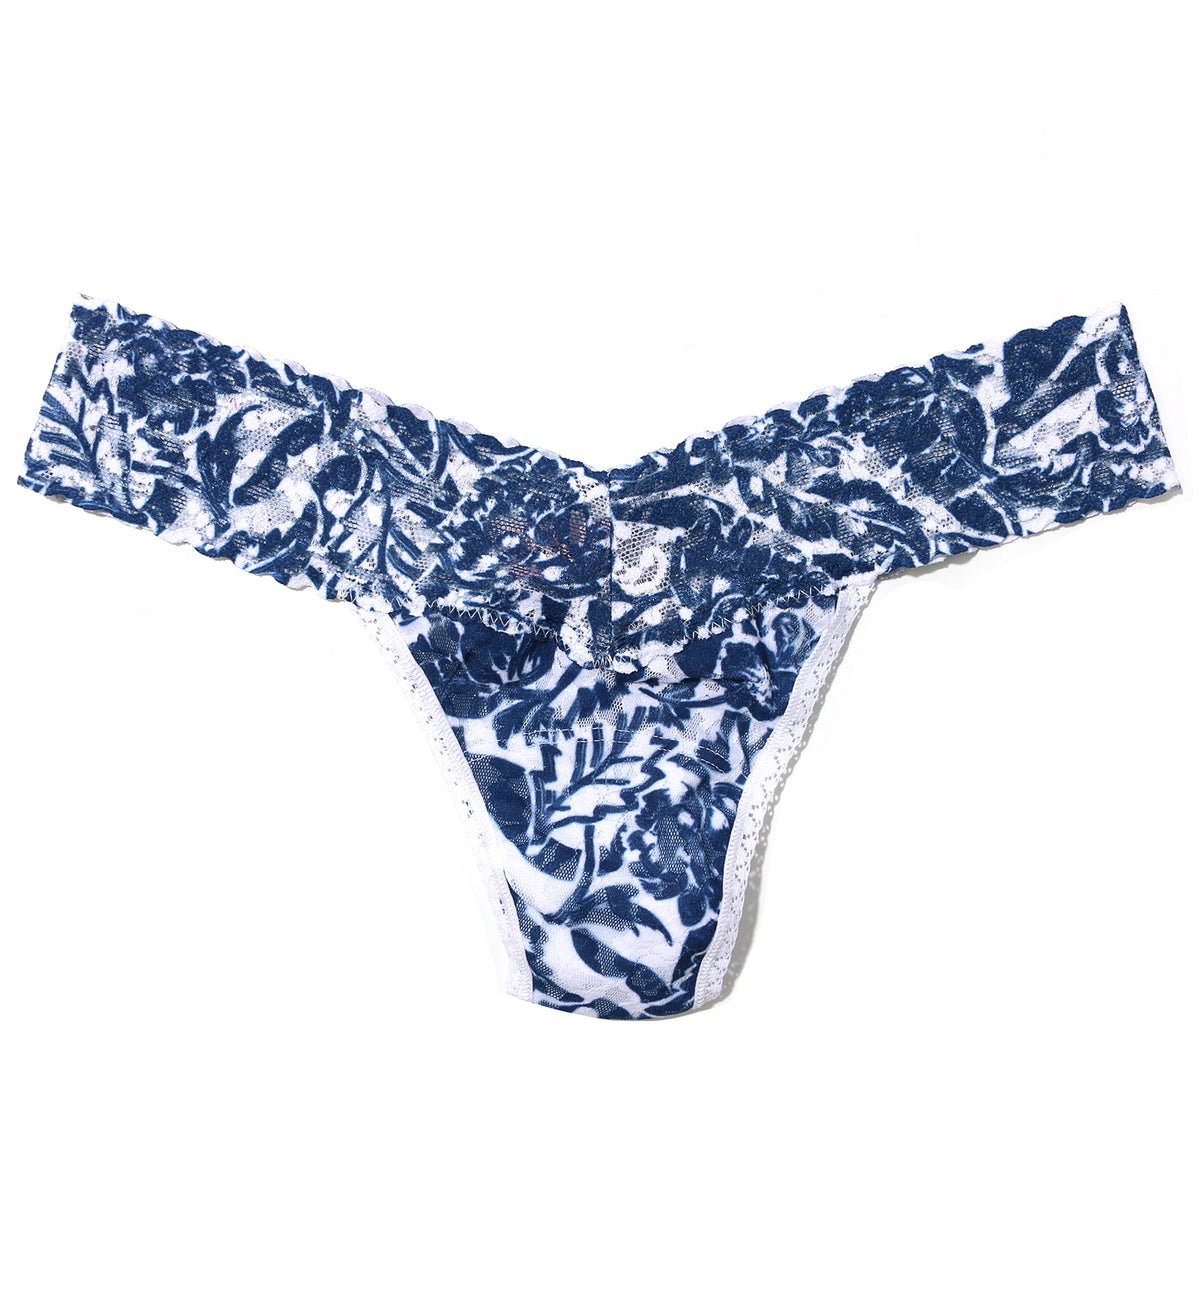 Hanky Panky Signature Lace Printed Low Rise Thong (PR4911P),Sketchbook Floral - Sketchbook Floral,One Size